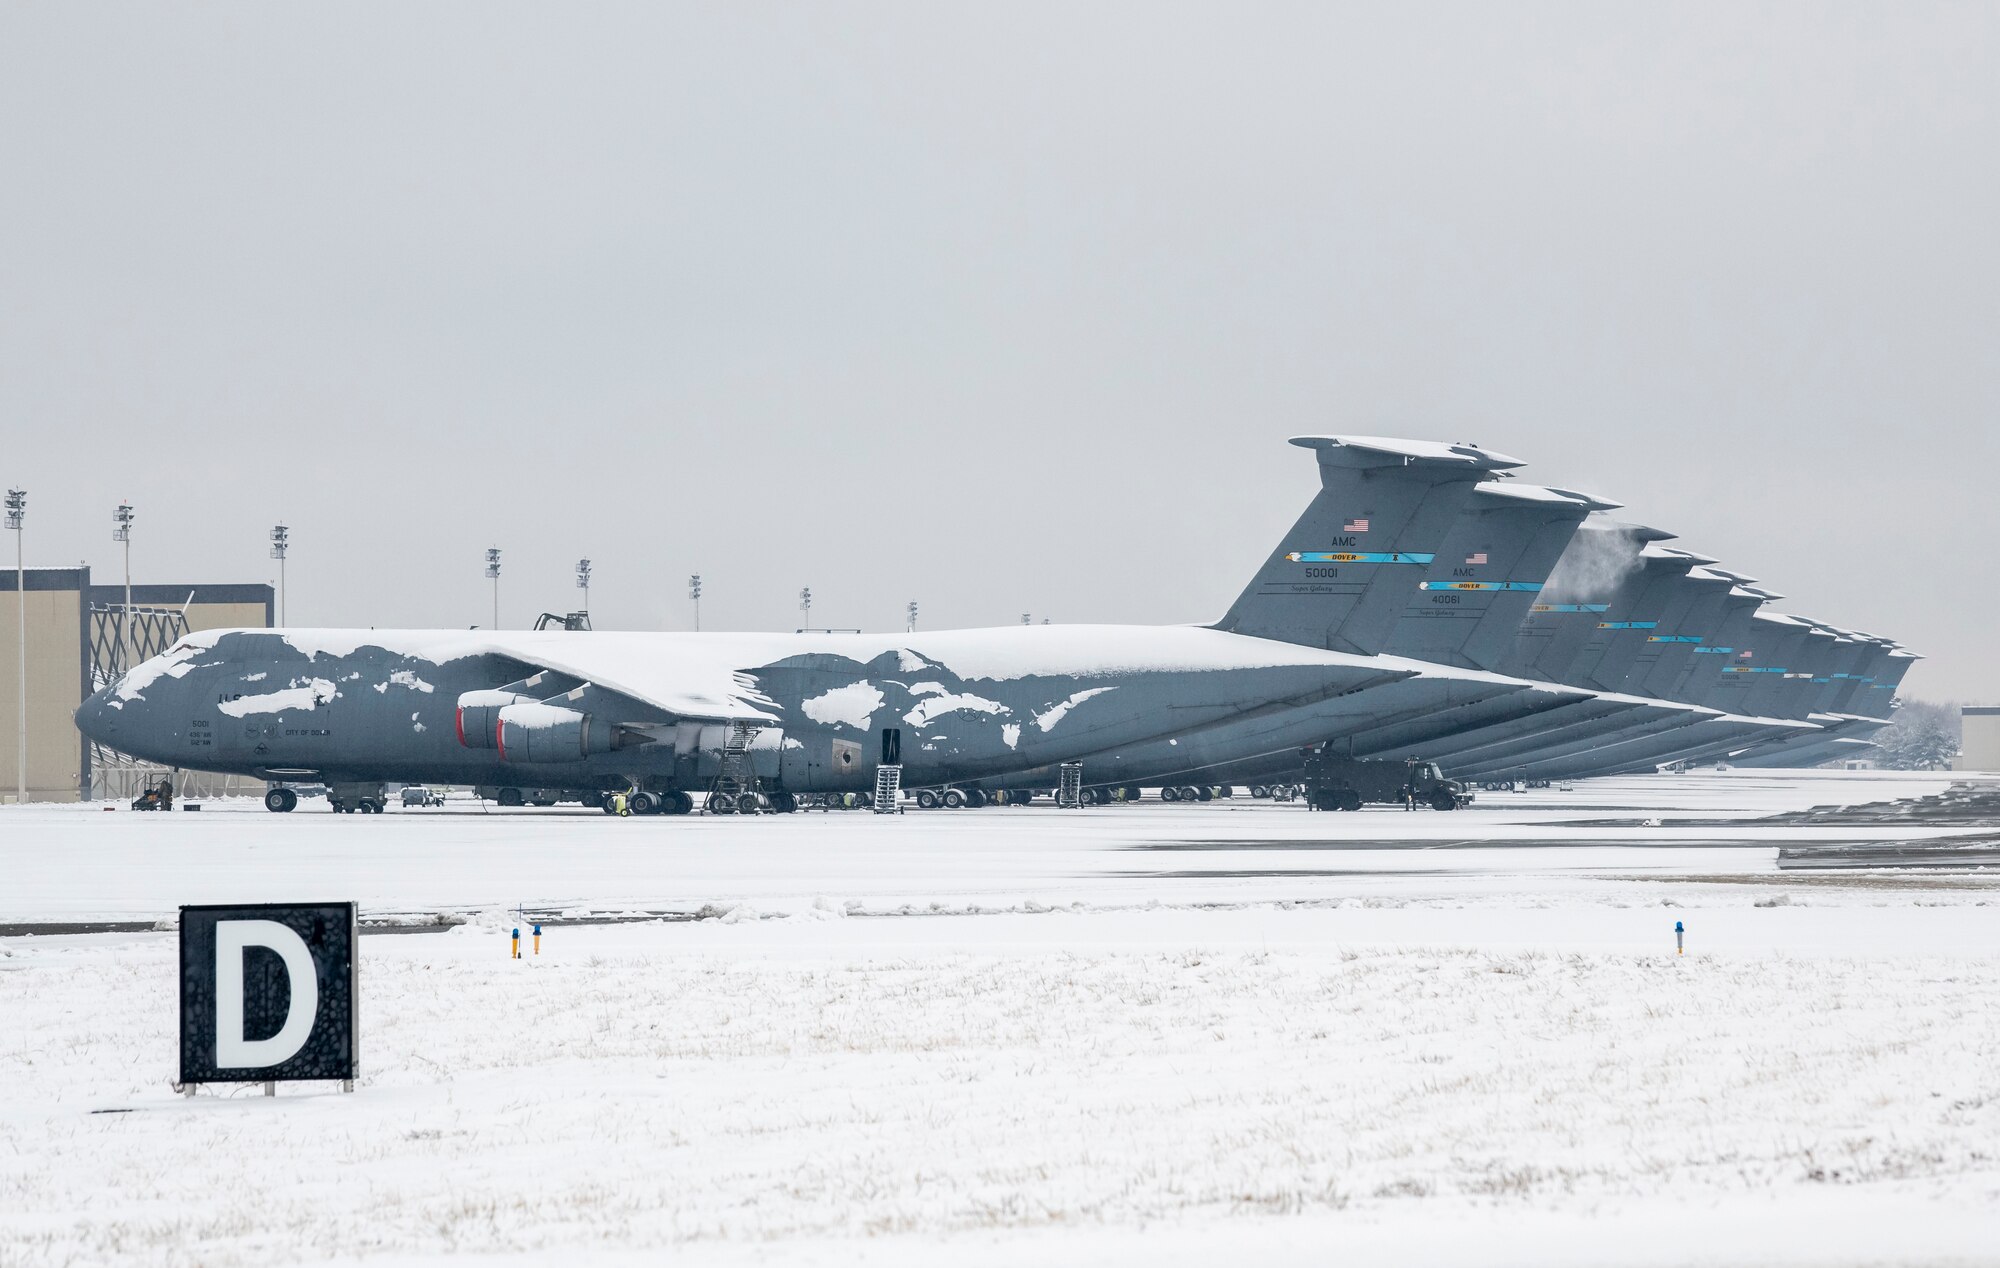 Snow-covered C-5M Super Galaxy aircraft sit on the flight line at Dover Air Force Base, Delaware, Feb. 11, 2021. As snow fell, the base continued normal operations and prepared for additional snowfall. (U.S. Air Force photo by Senior Airman Christopher Quail)